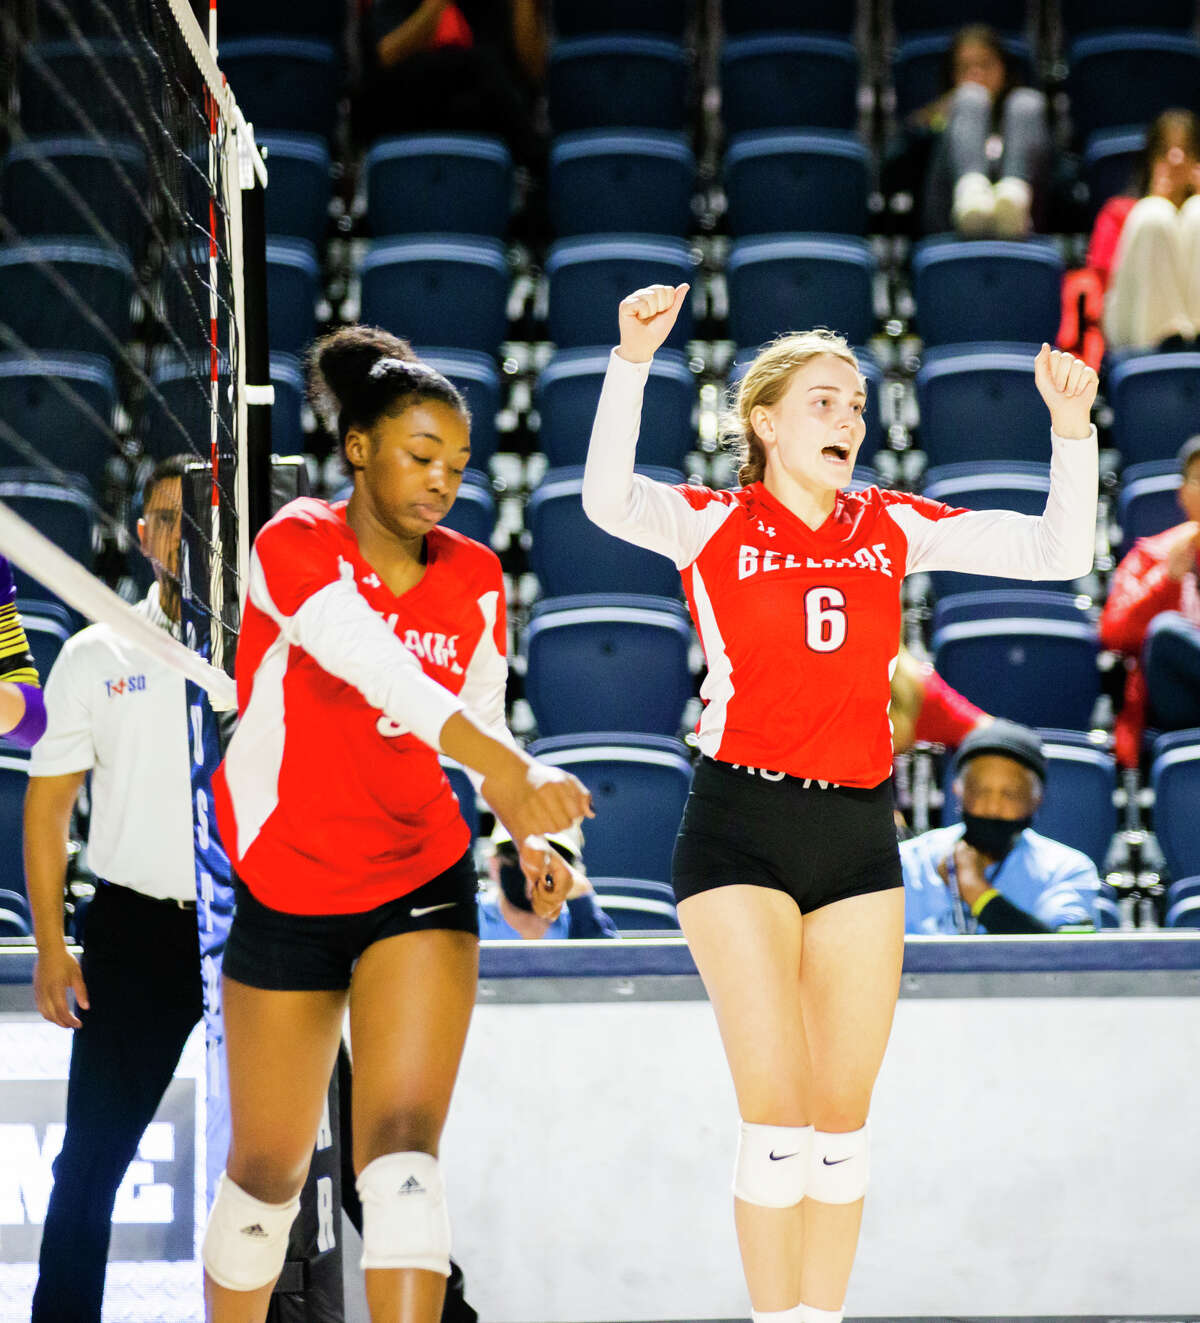 Bellaire Lady Cardinals Amanda Roberts #8 reacts after a point during the first set of action at a high school volleyball, Region III-6A bi-district playoffs Bellaire vs Jersey Village at Delmar Field House in Houston, TX, November 1, 2022. Bellaire Lady Cardinals defeated Jersey Village Lady Falcons 3-1 sets.